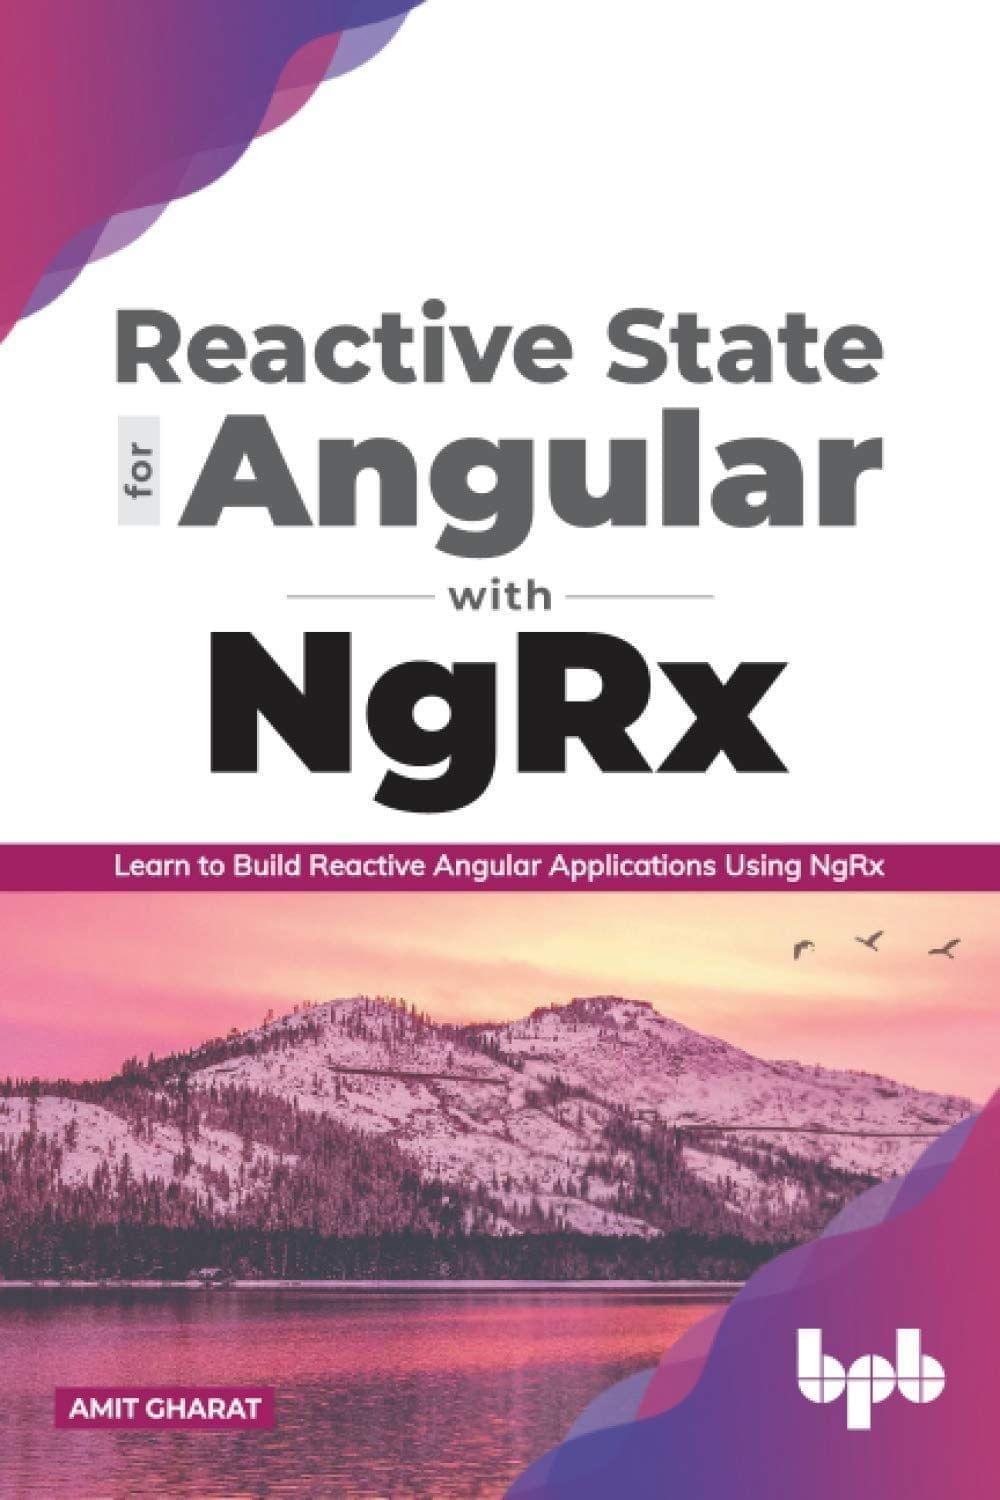 Reactive State for Angular with NgRx [Paperback] Amit Gharat